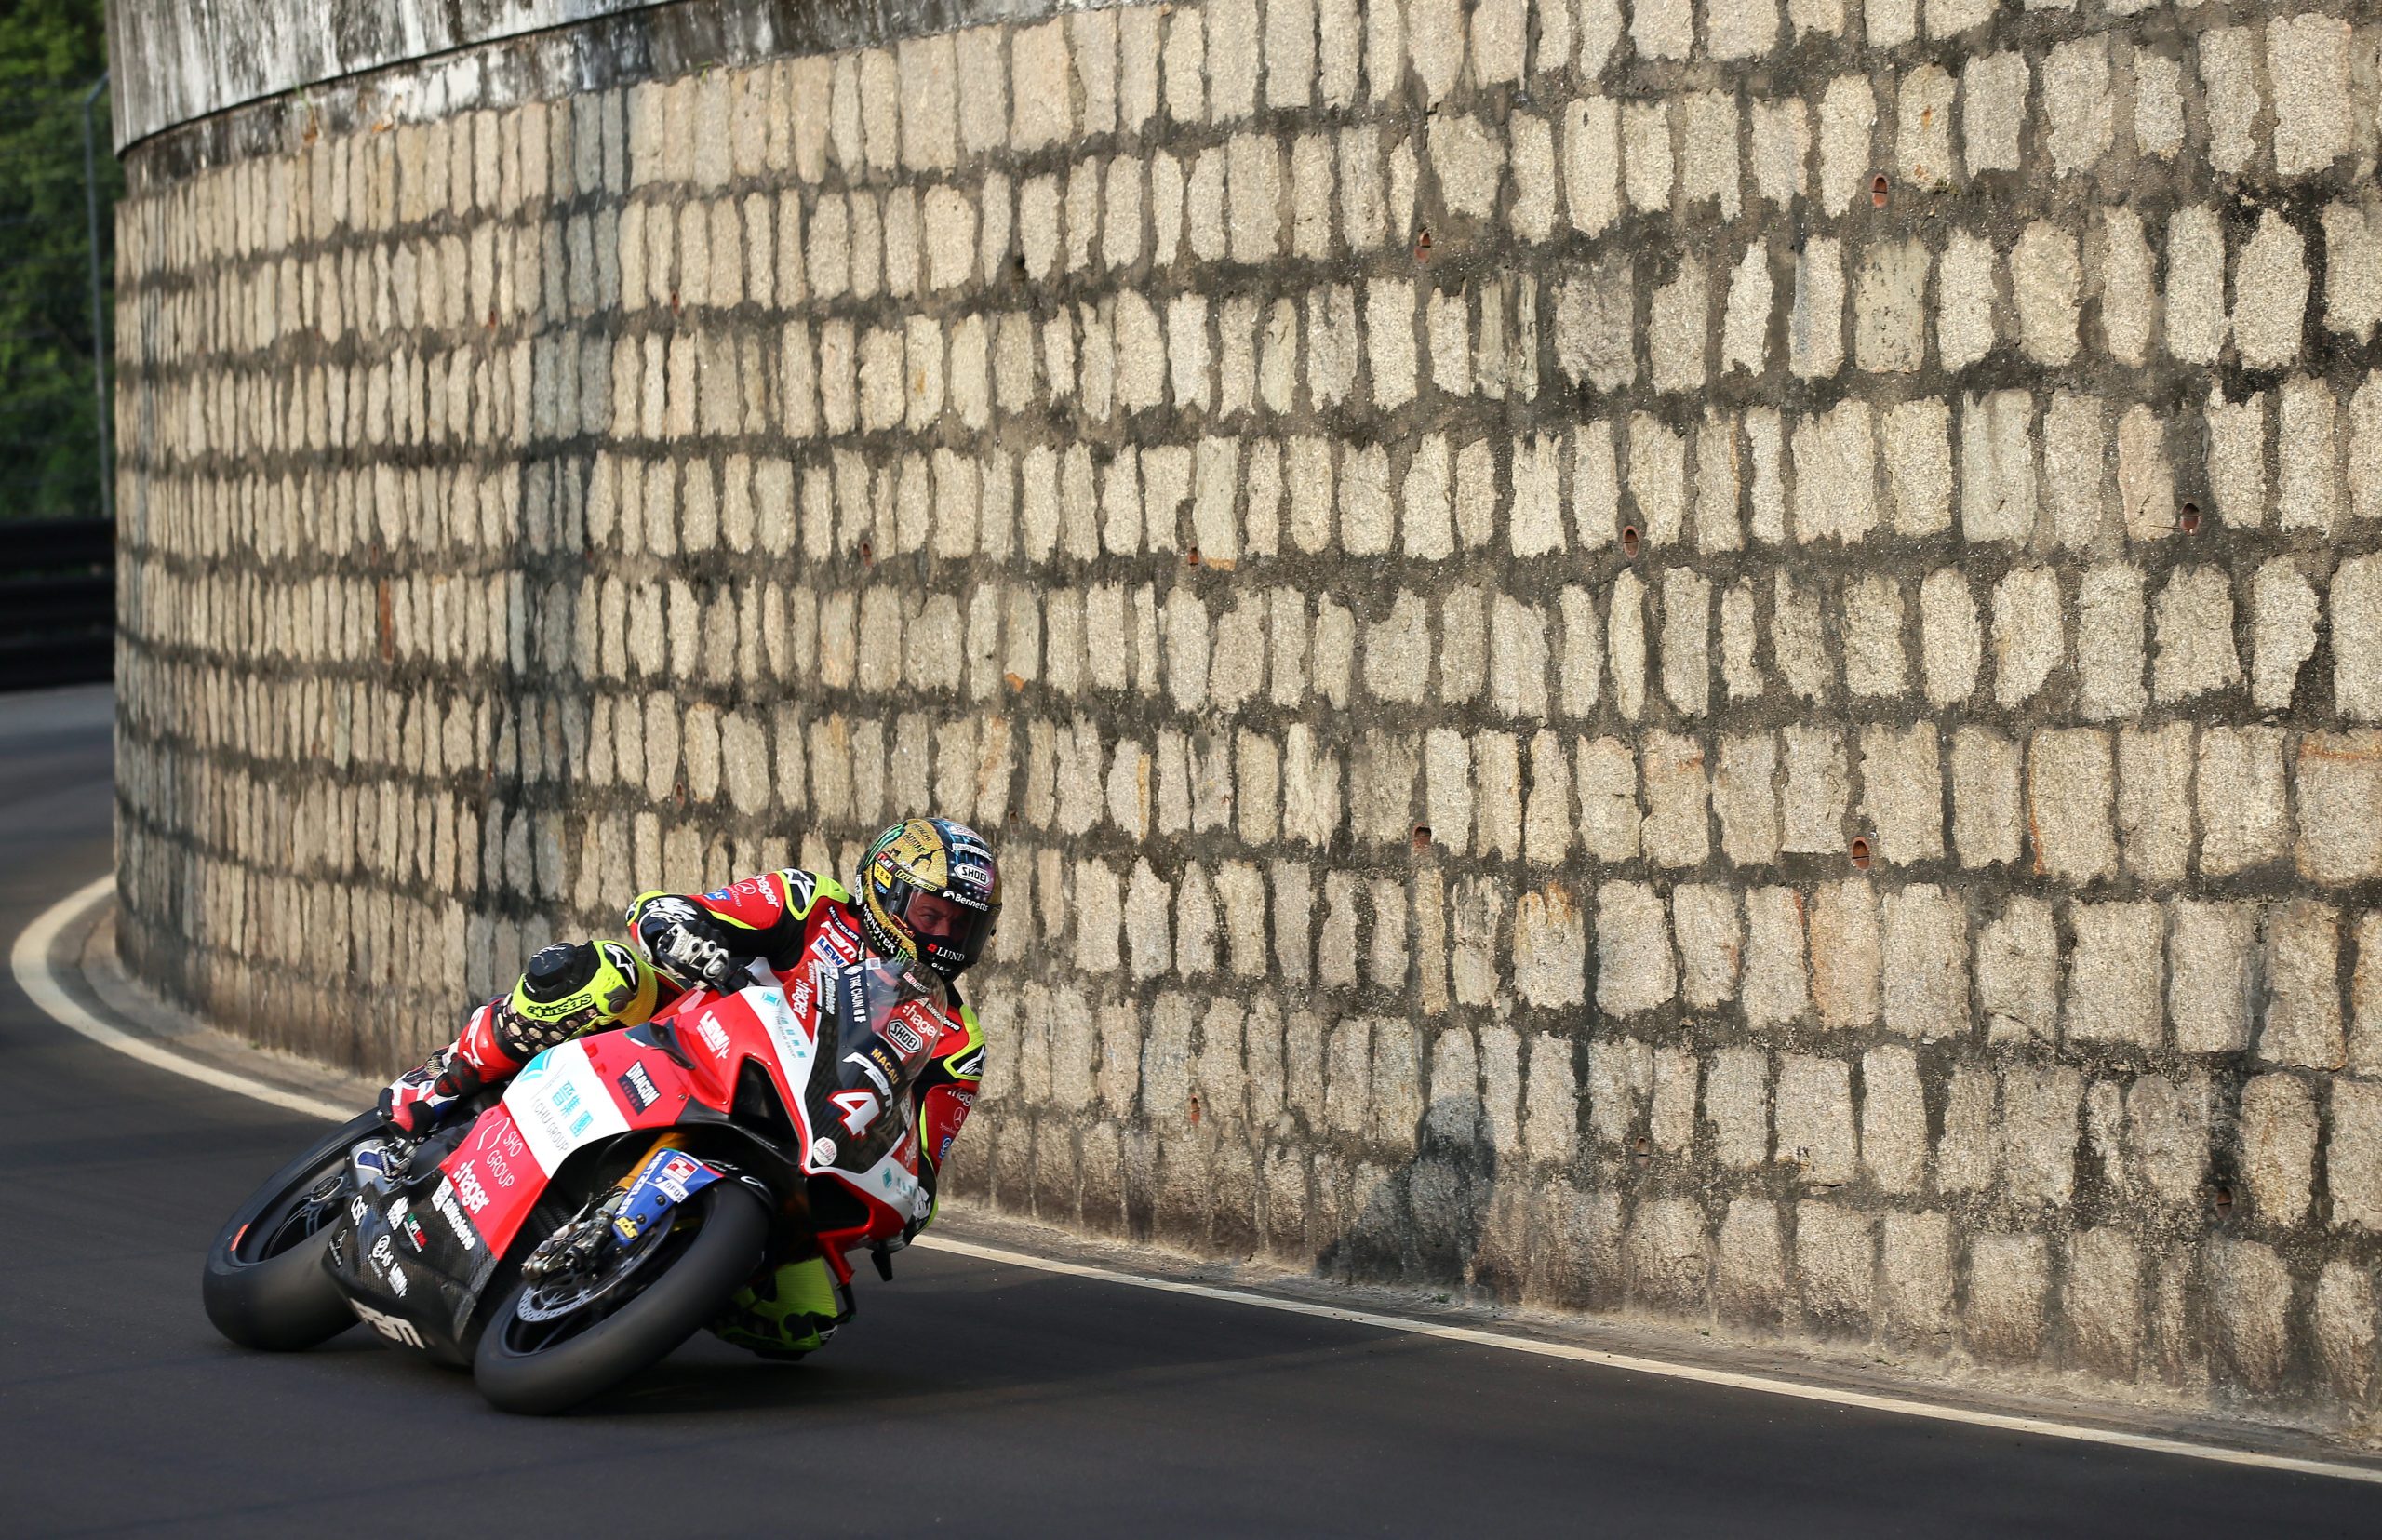 John McGuinness was also part of the Ducati Duo who impressed at Macau GP